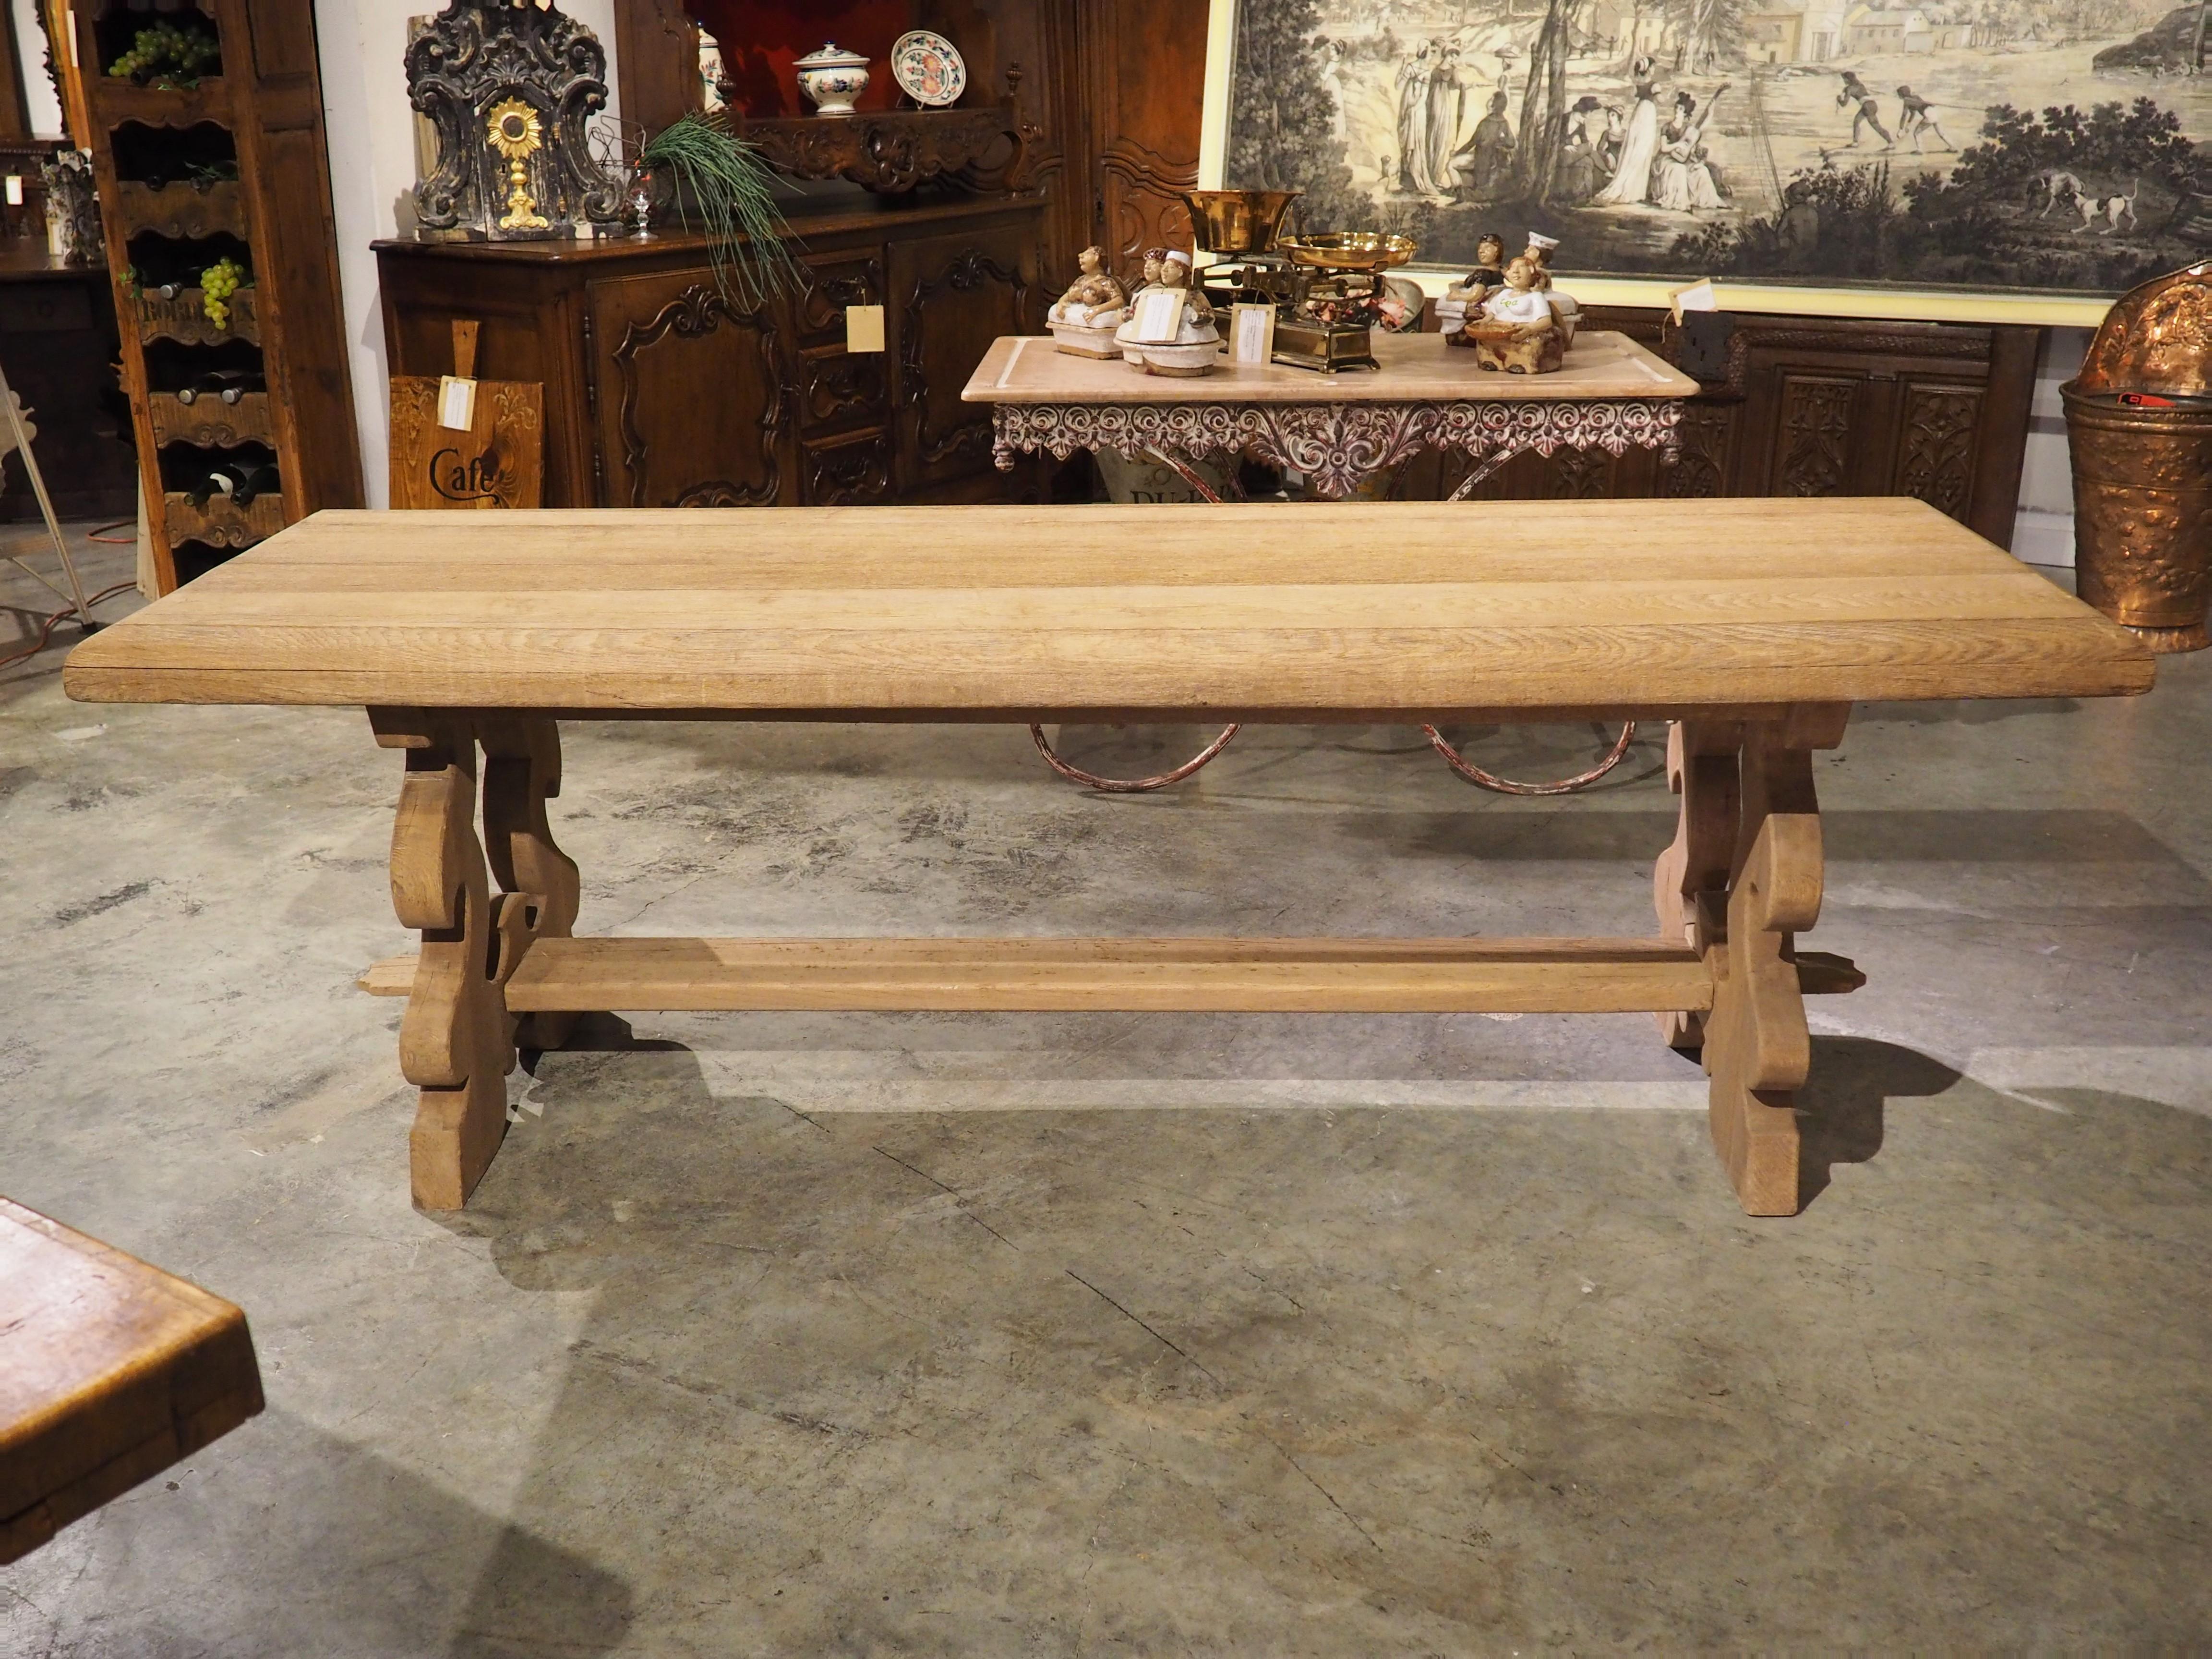 Produced in Italy during the 20th century, this bleached trestle table with thick, lyre shaped legs can be considered the Baroque style. The top of our table is comprised of several planks of oak that feature beautiful, large quarter round edges.